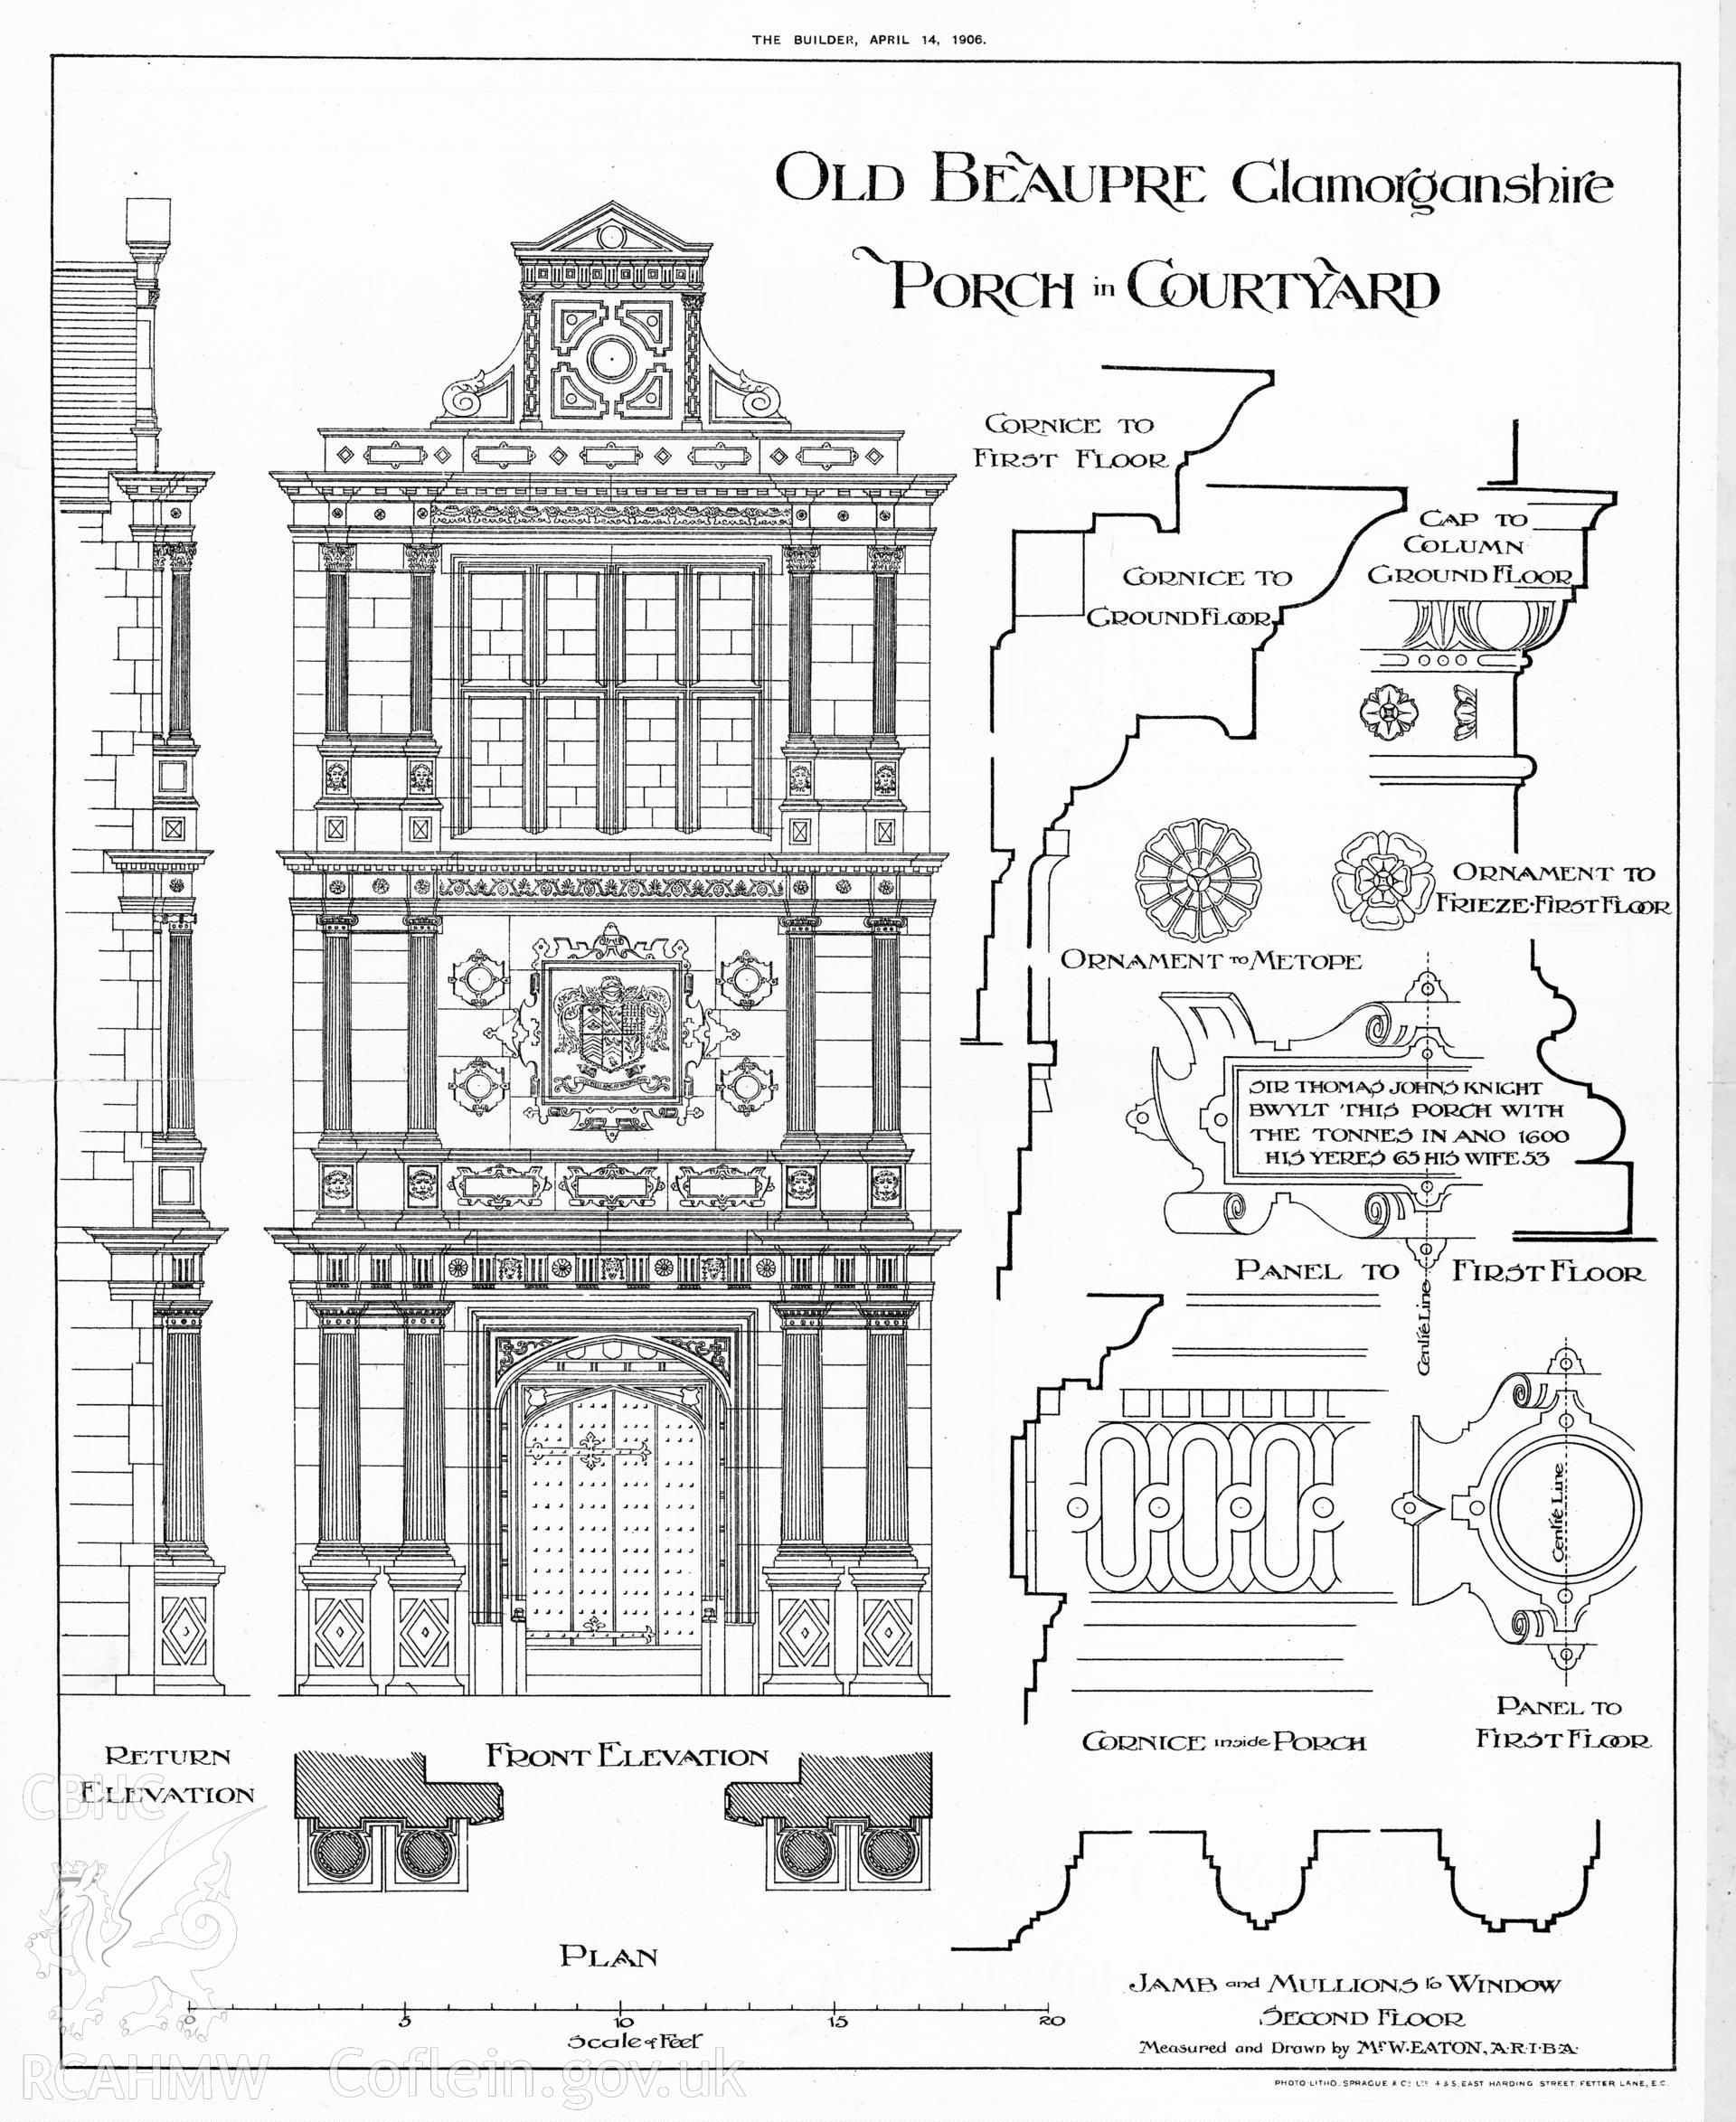 Copy of a non RCAHMW drawing showing elevation and detail at Old Beaupre, published in The Builder, April 14th, 1906.